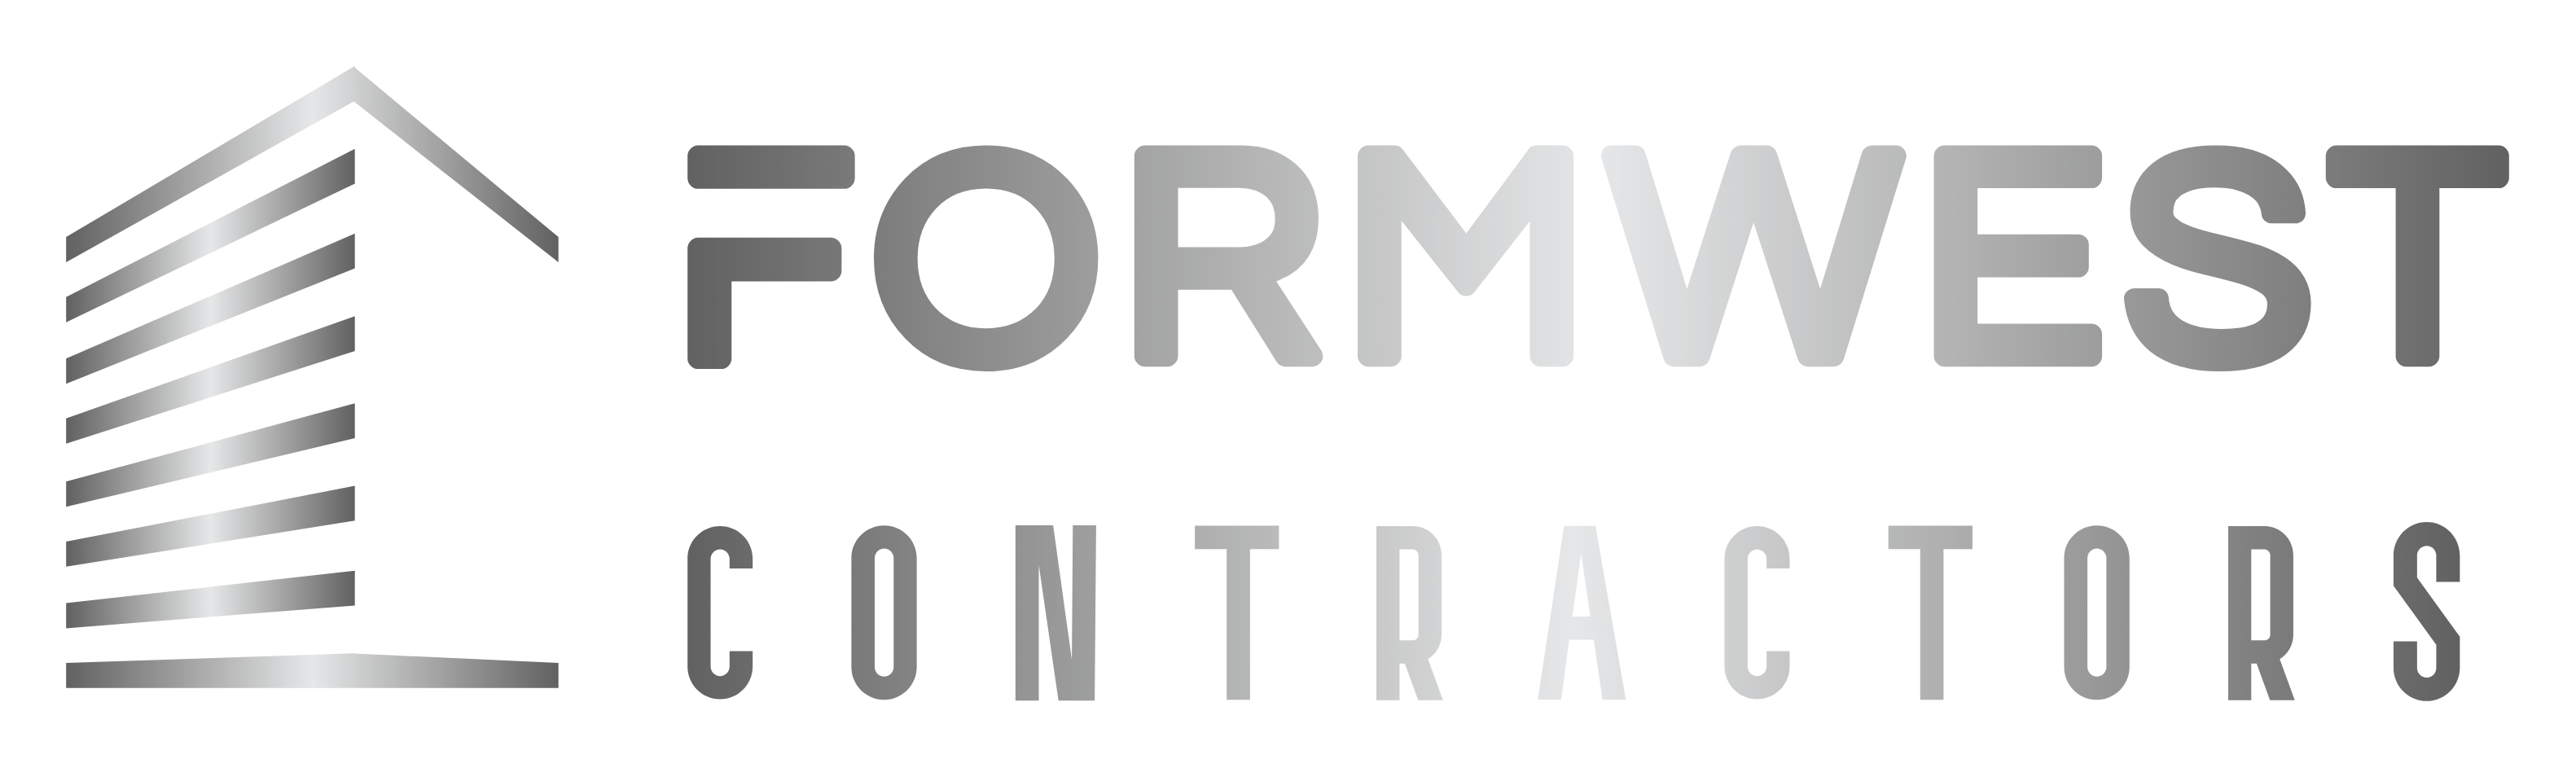 Formwest Contractors